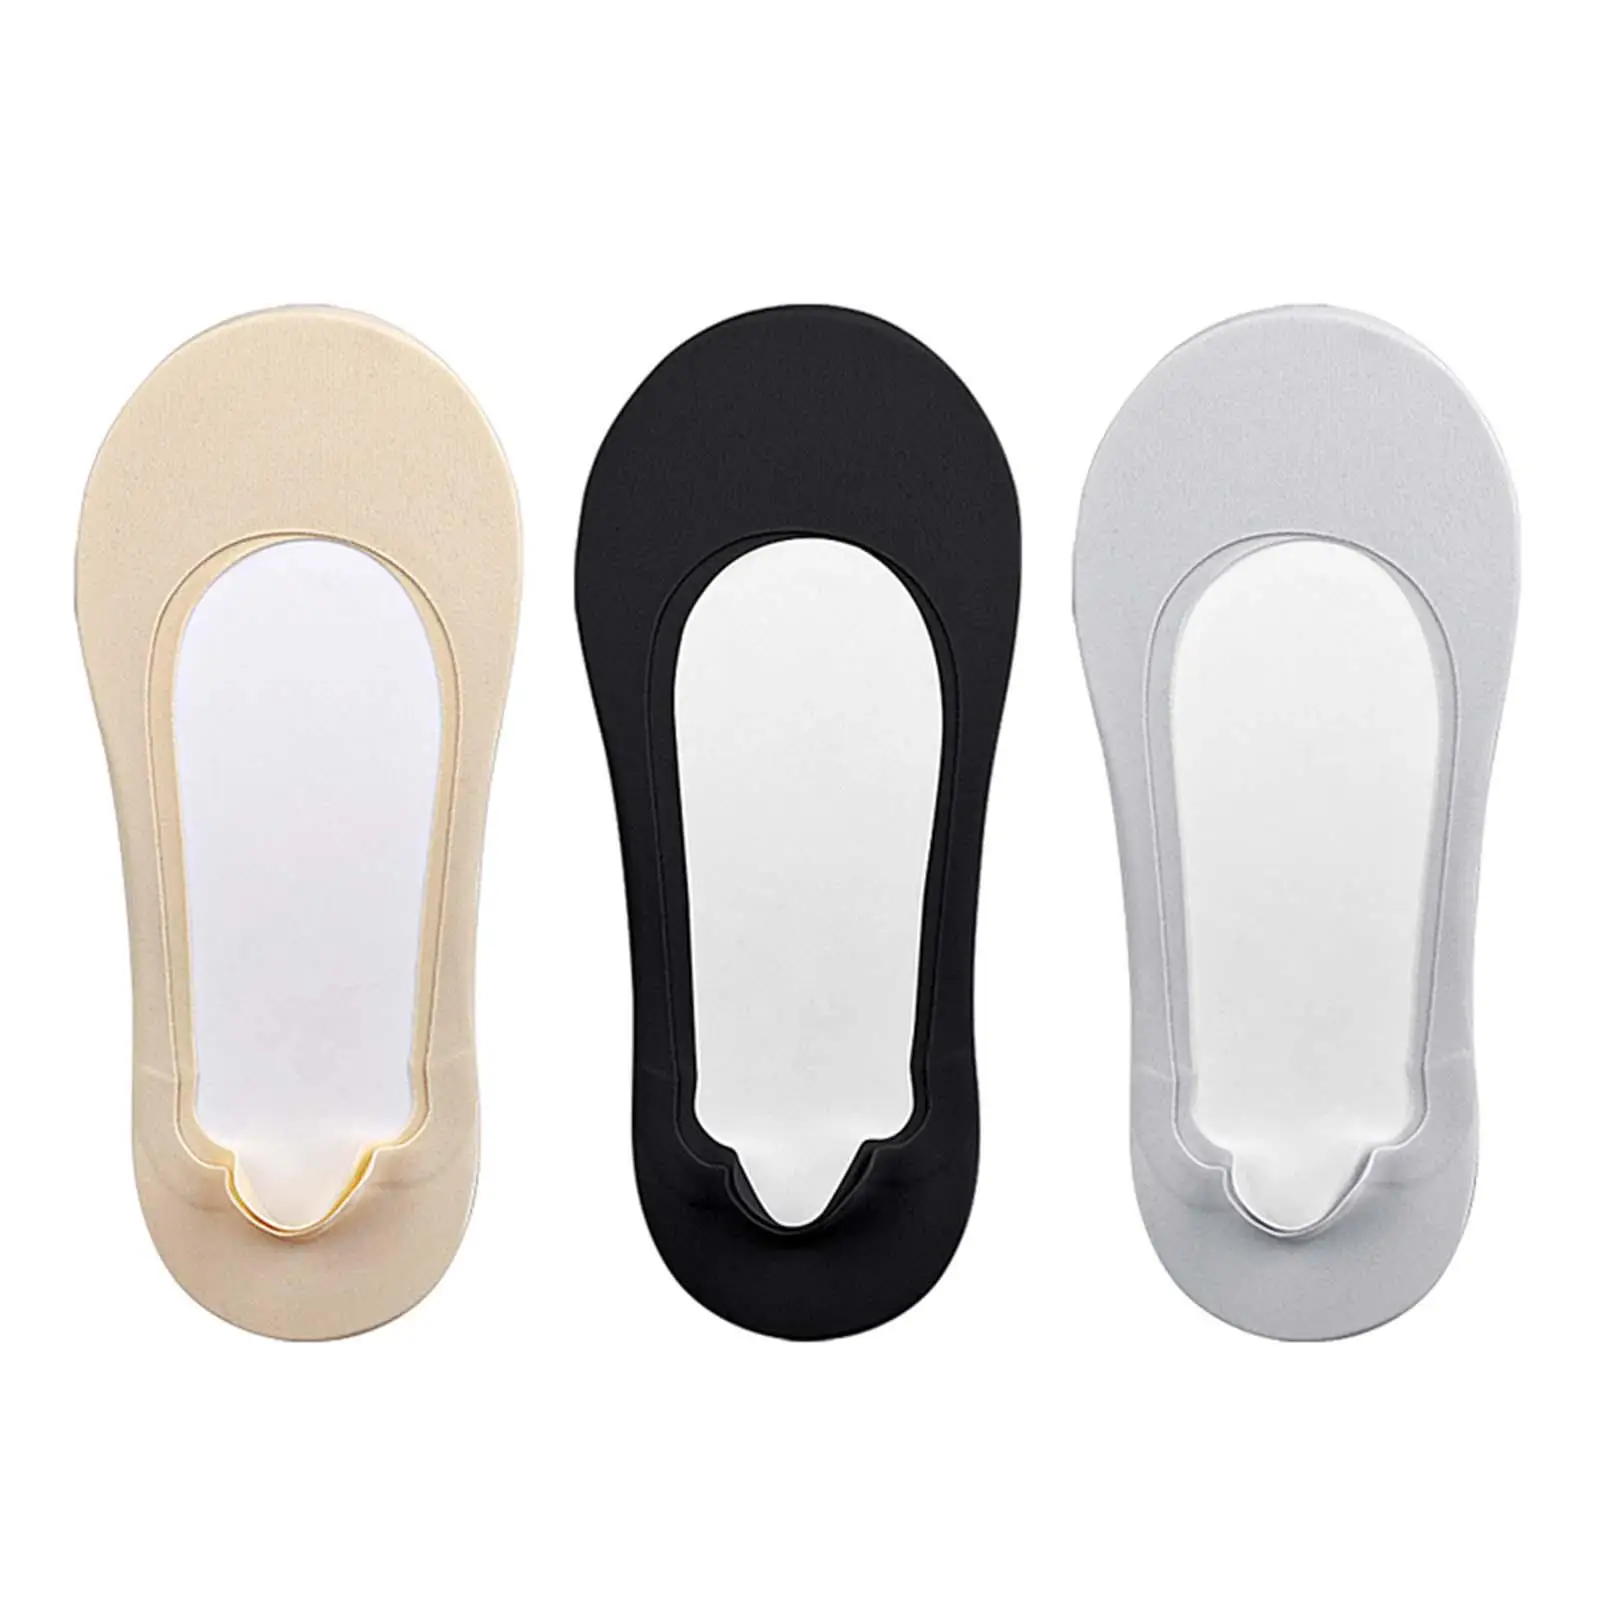 1 Pair No Show Socks Soft Toe Non Slip Breathable Casual Socks Womens Invisible Socks for Flats Sneakers Unisex Men Ladies